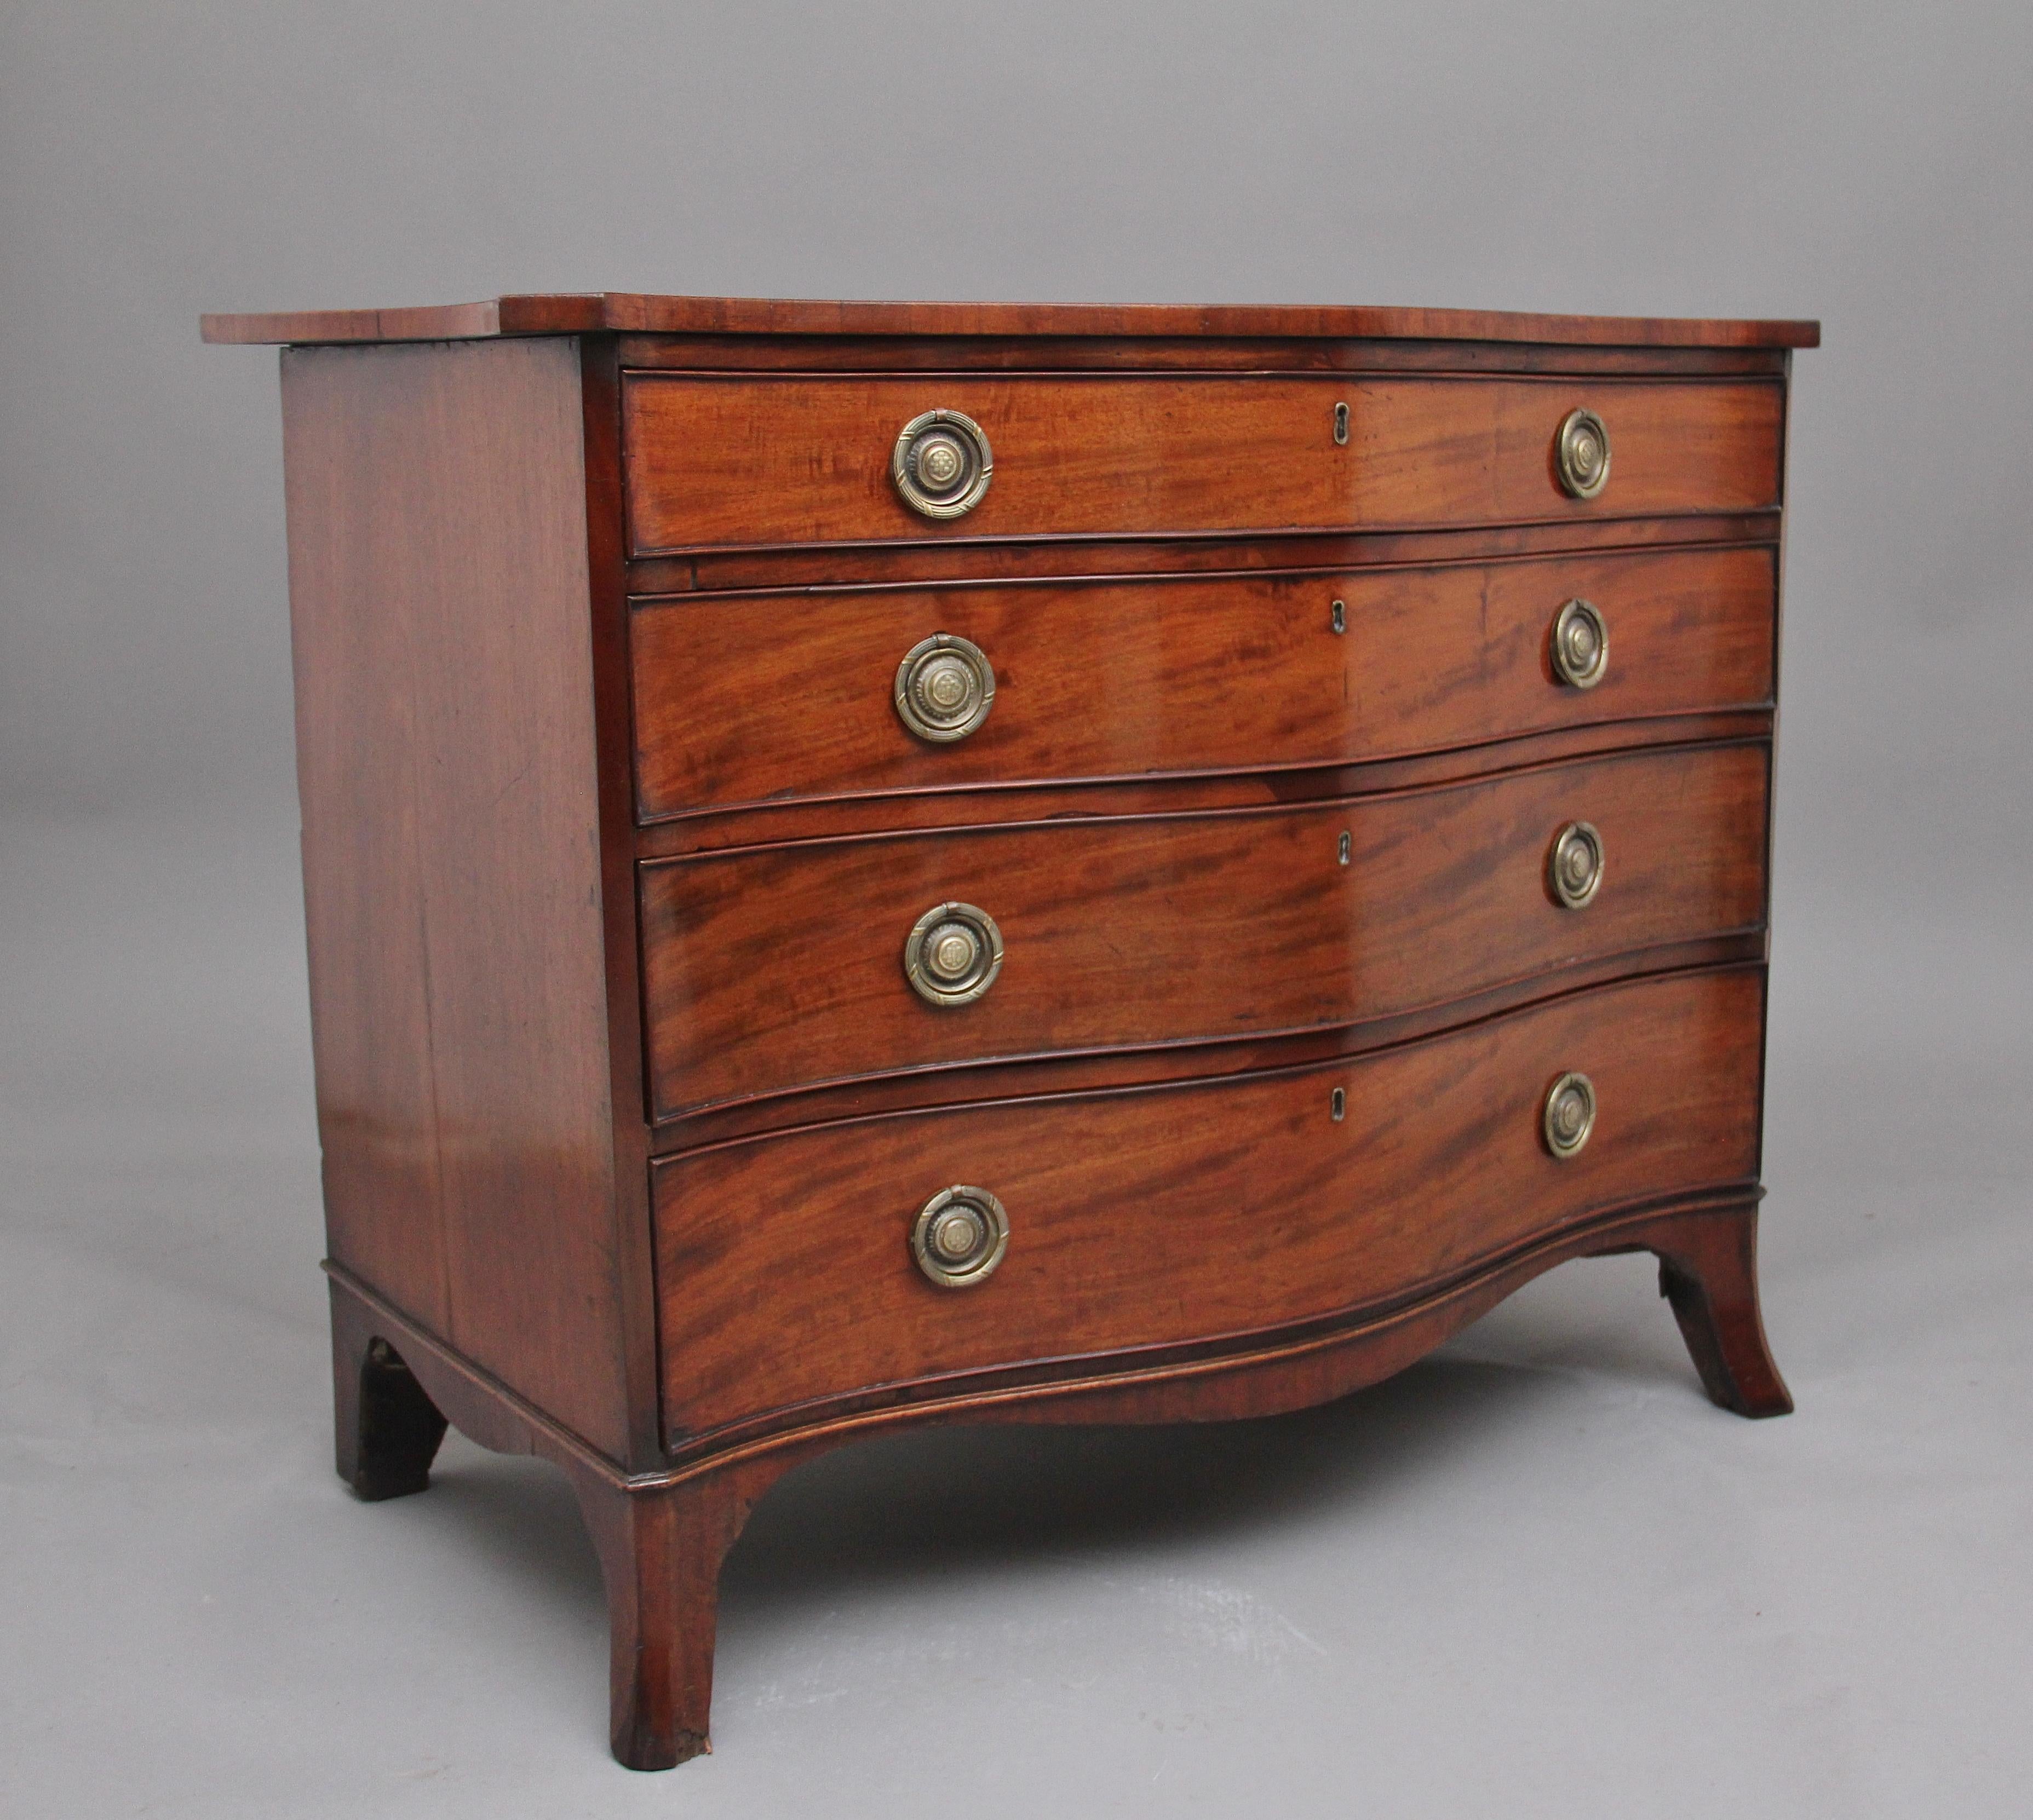 Superb quality 18th century mahogany serpentine chest of drawers, having a lovely figured and shaped top above four long oak lined drawers with engraved brass ring handles and escutcheons, shaped apron to the sides and front of the chest, standing